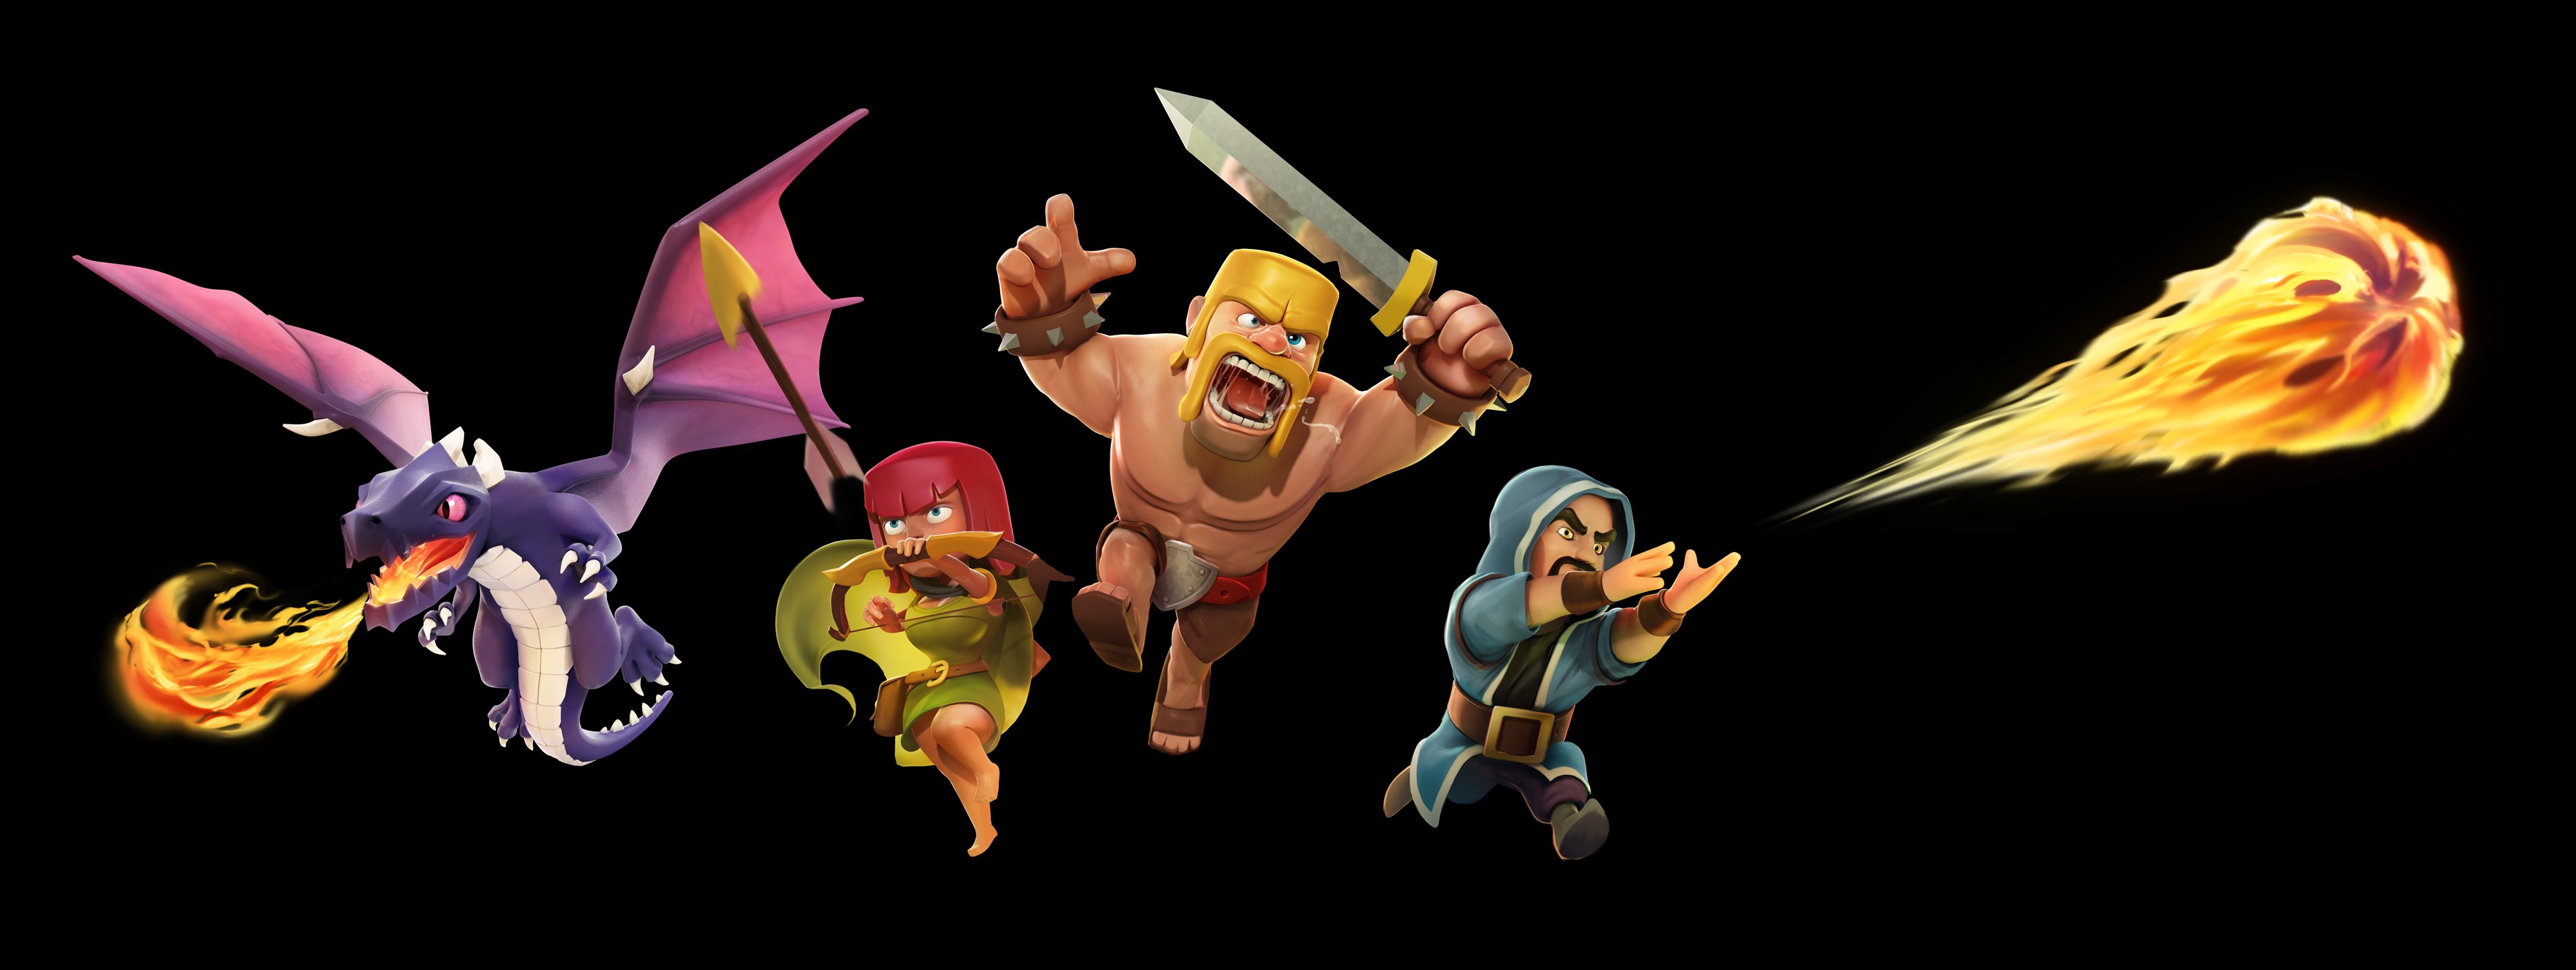 Clash of clans bring the pain